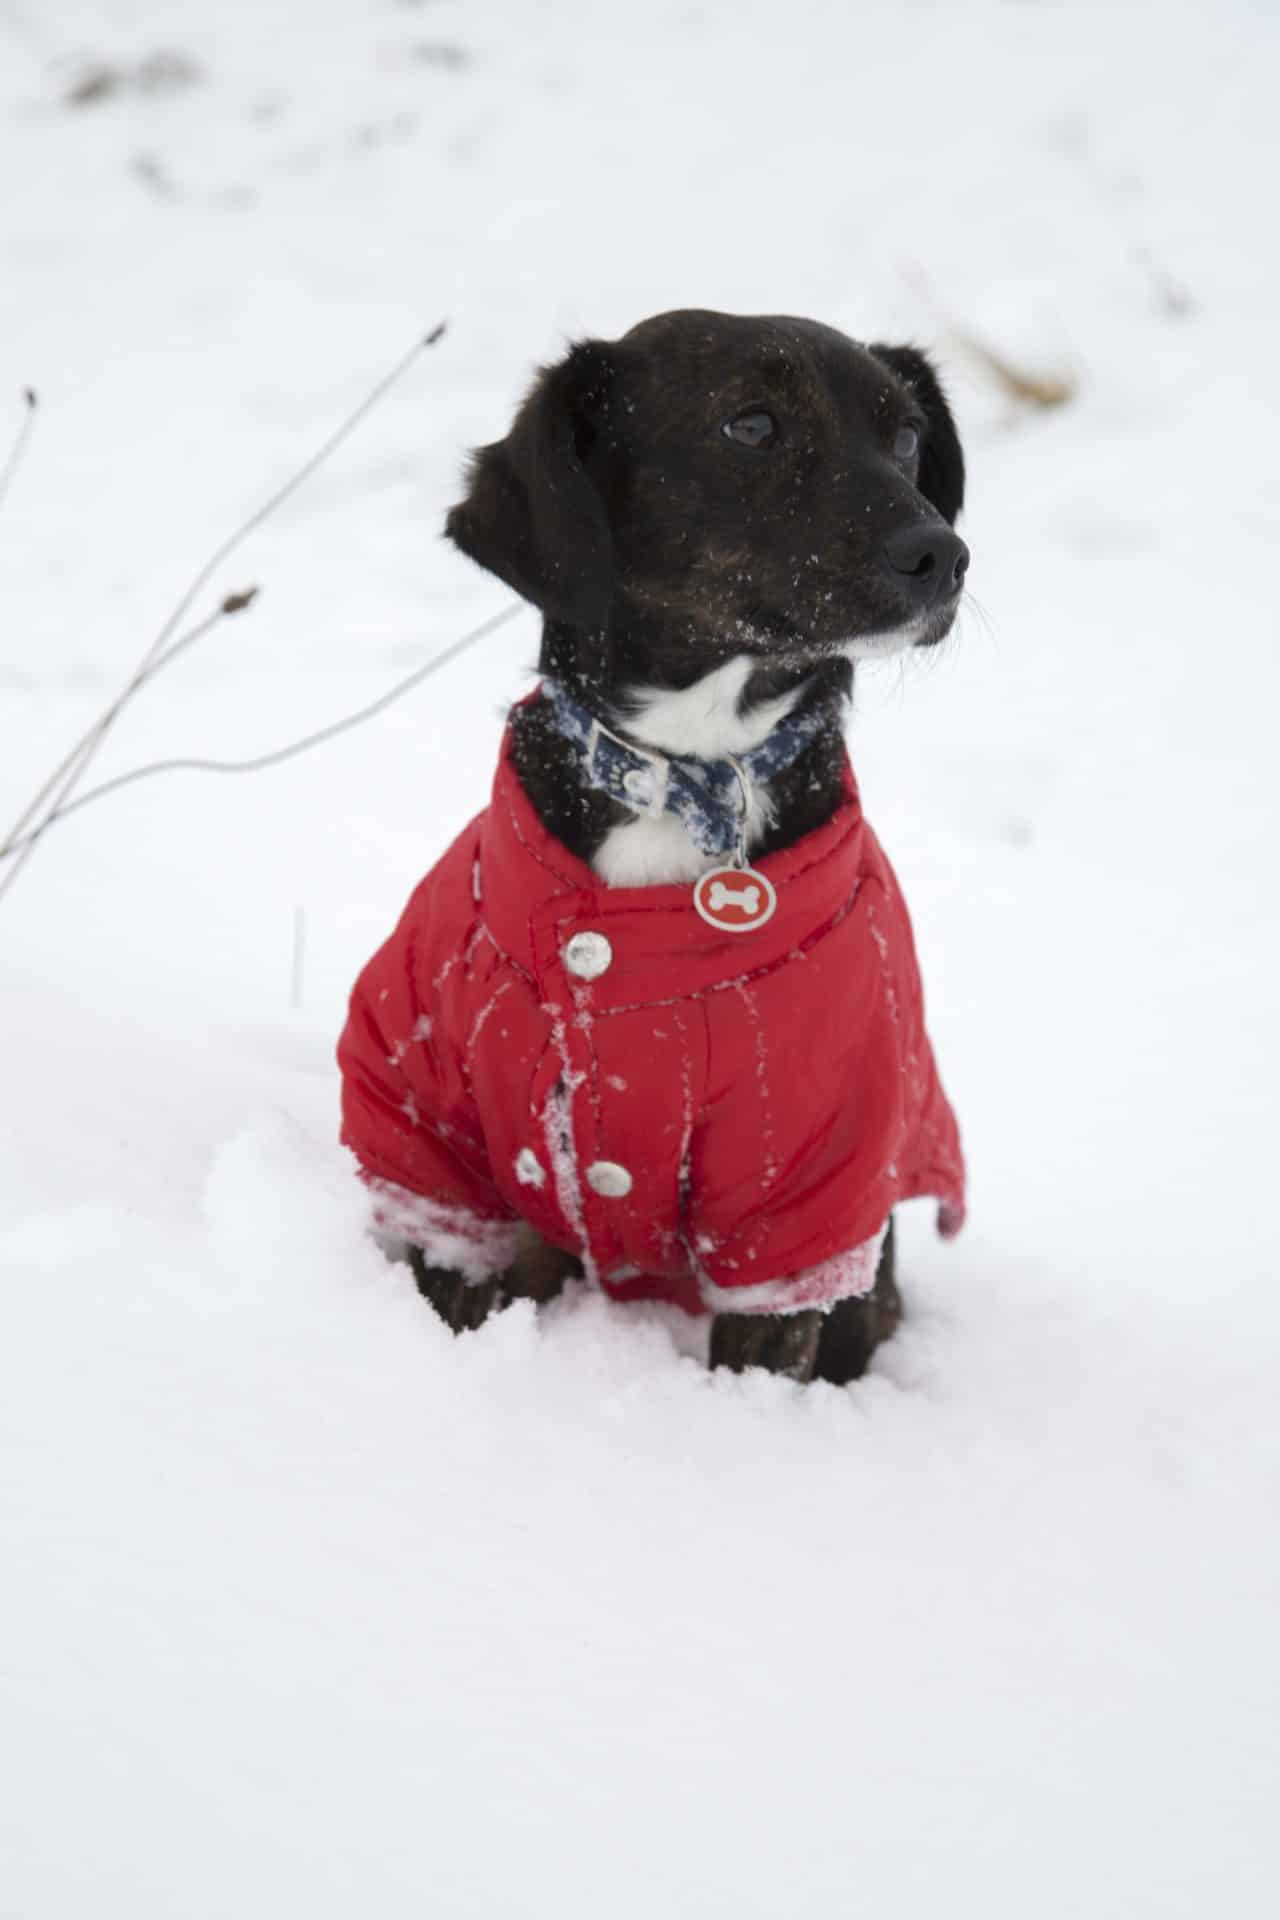 Pets can safely enjoy the outdoors as long it’s not too cold and they have protection.